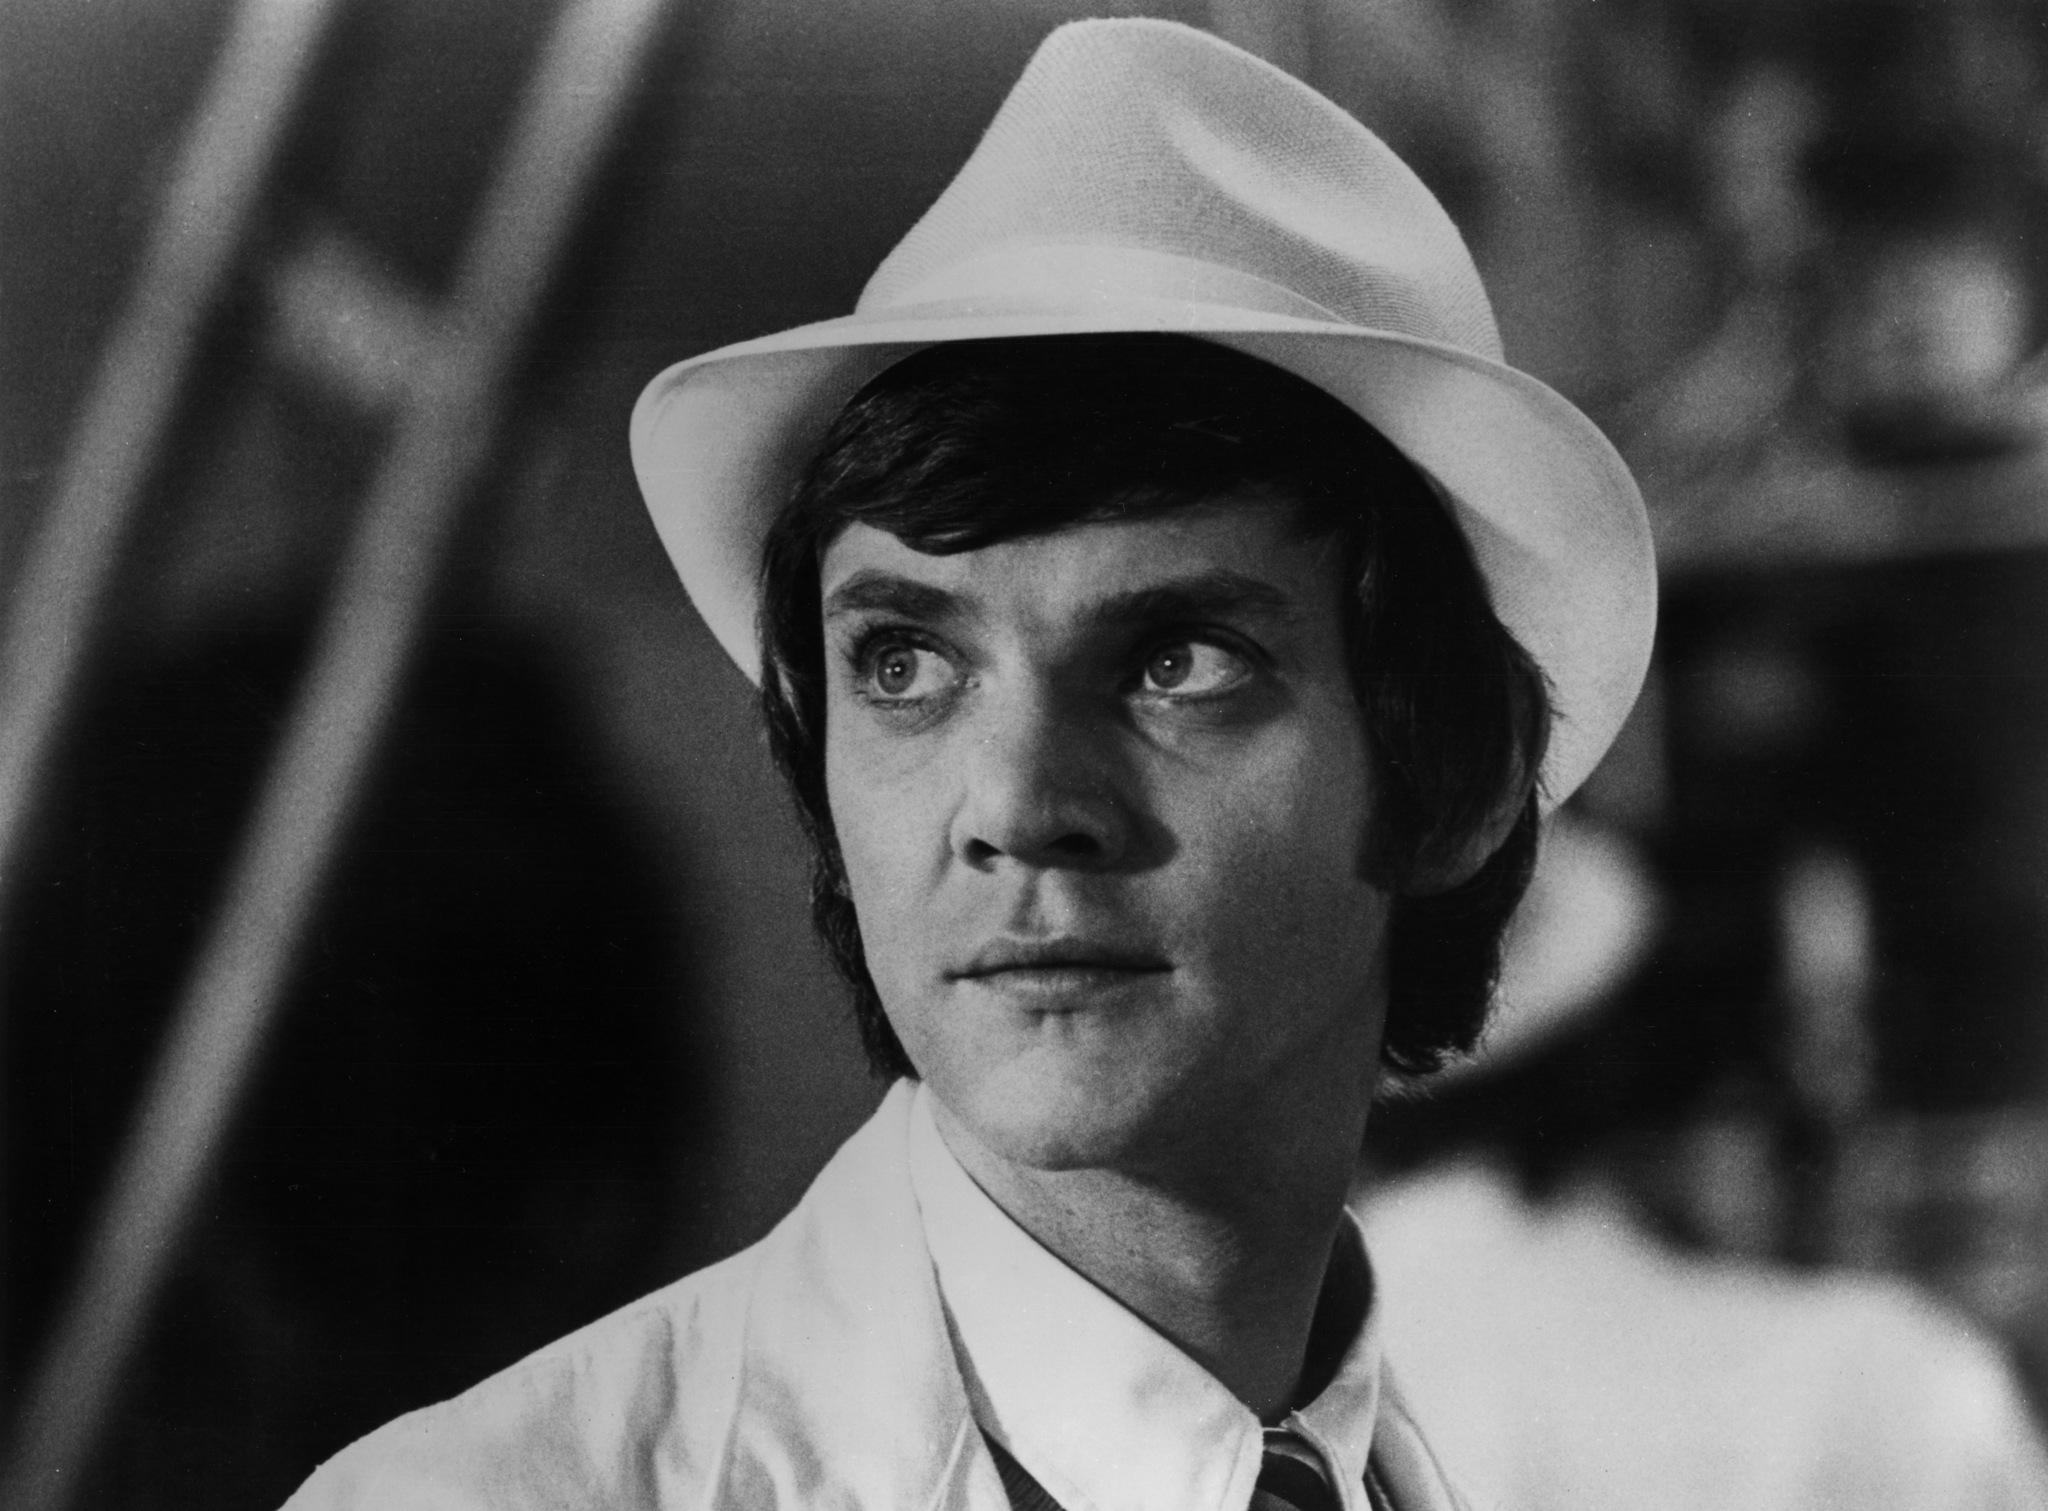 Malcolm McDowell Quotes. QuotesGram 2050x1520